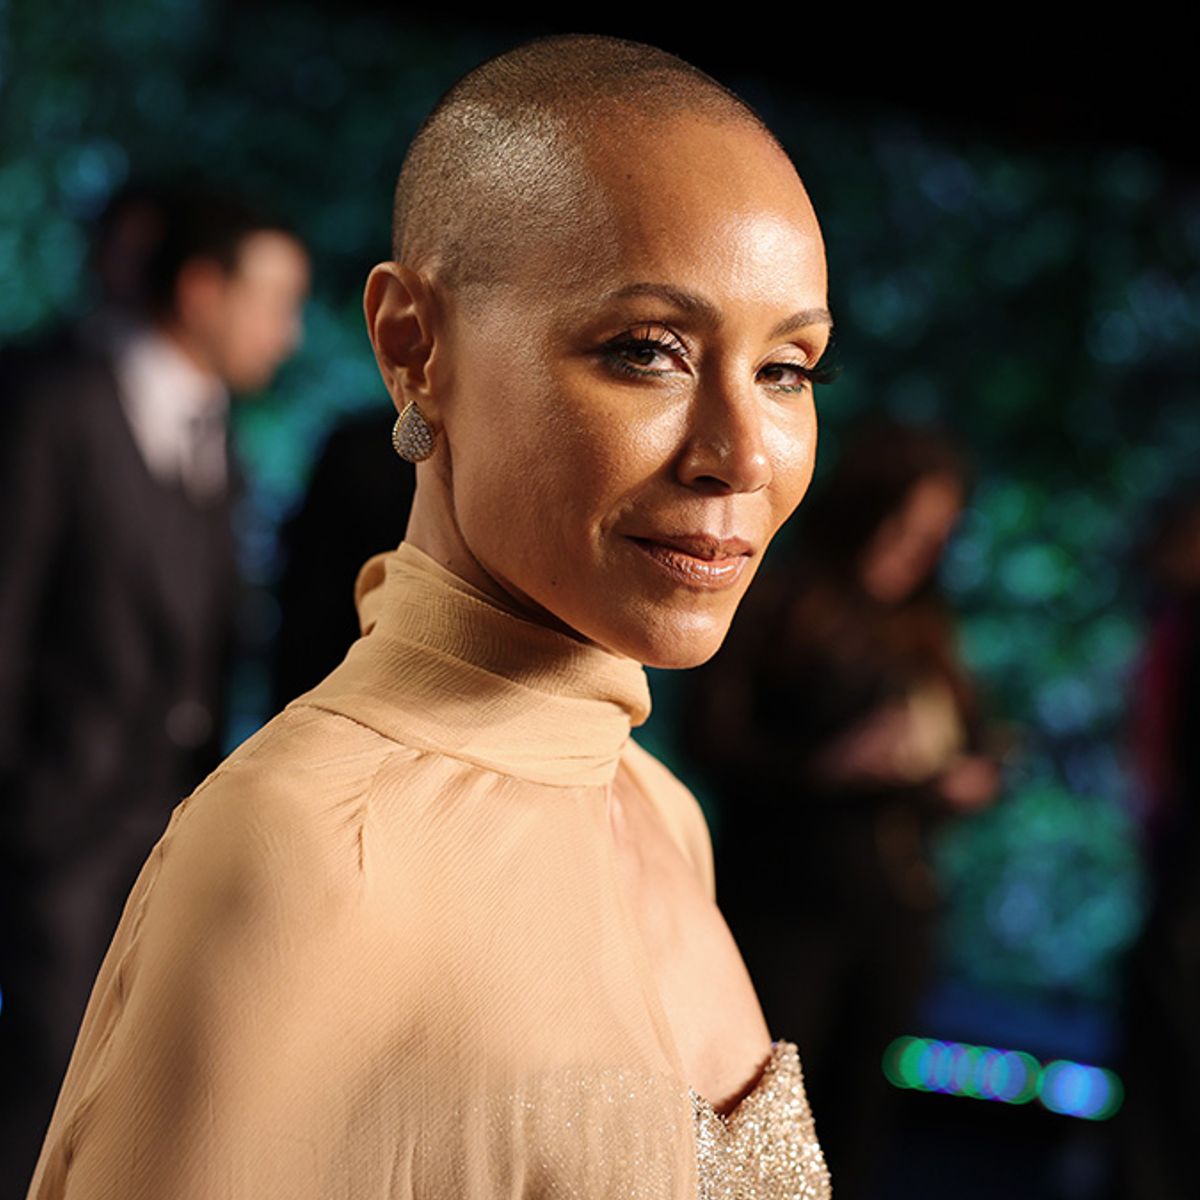 Did Disney Cast Jada Pinkett Smith as Rapunzel in Live-Action 'Tangled'?